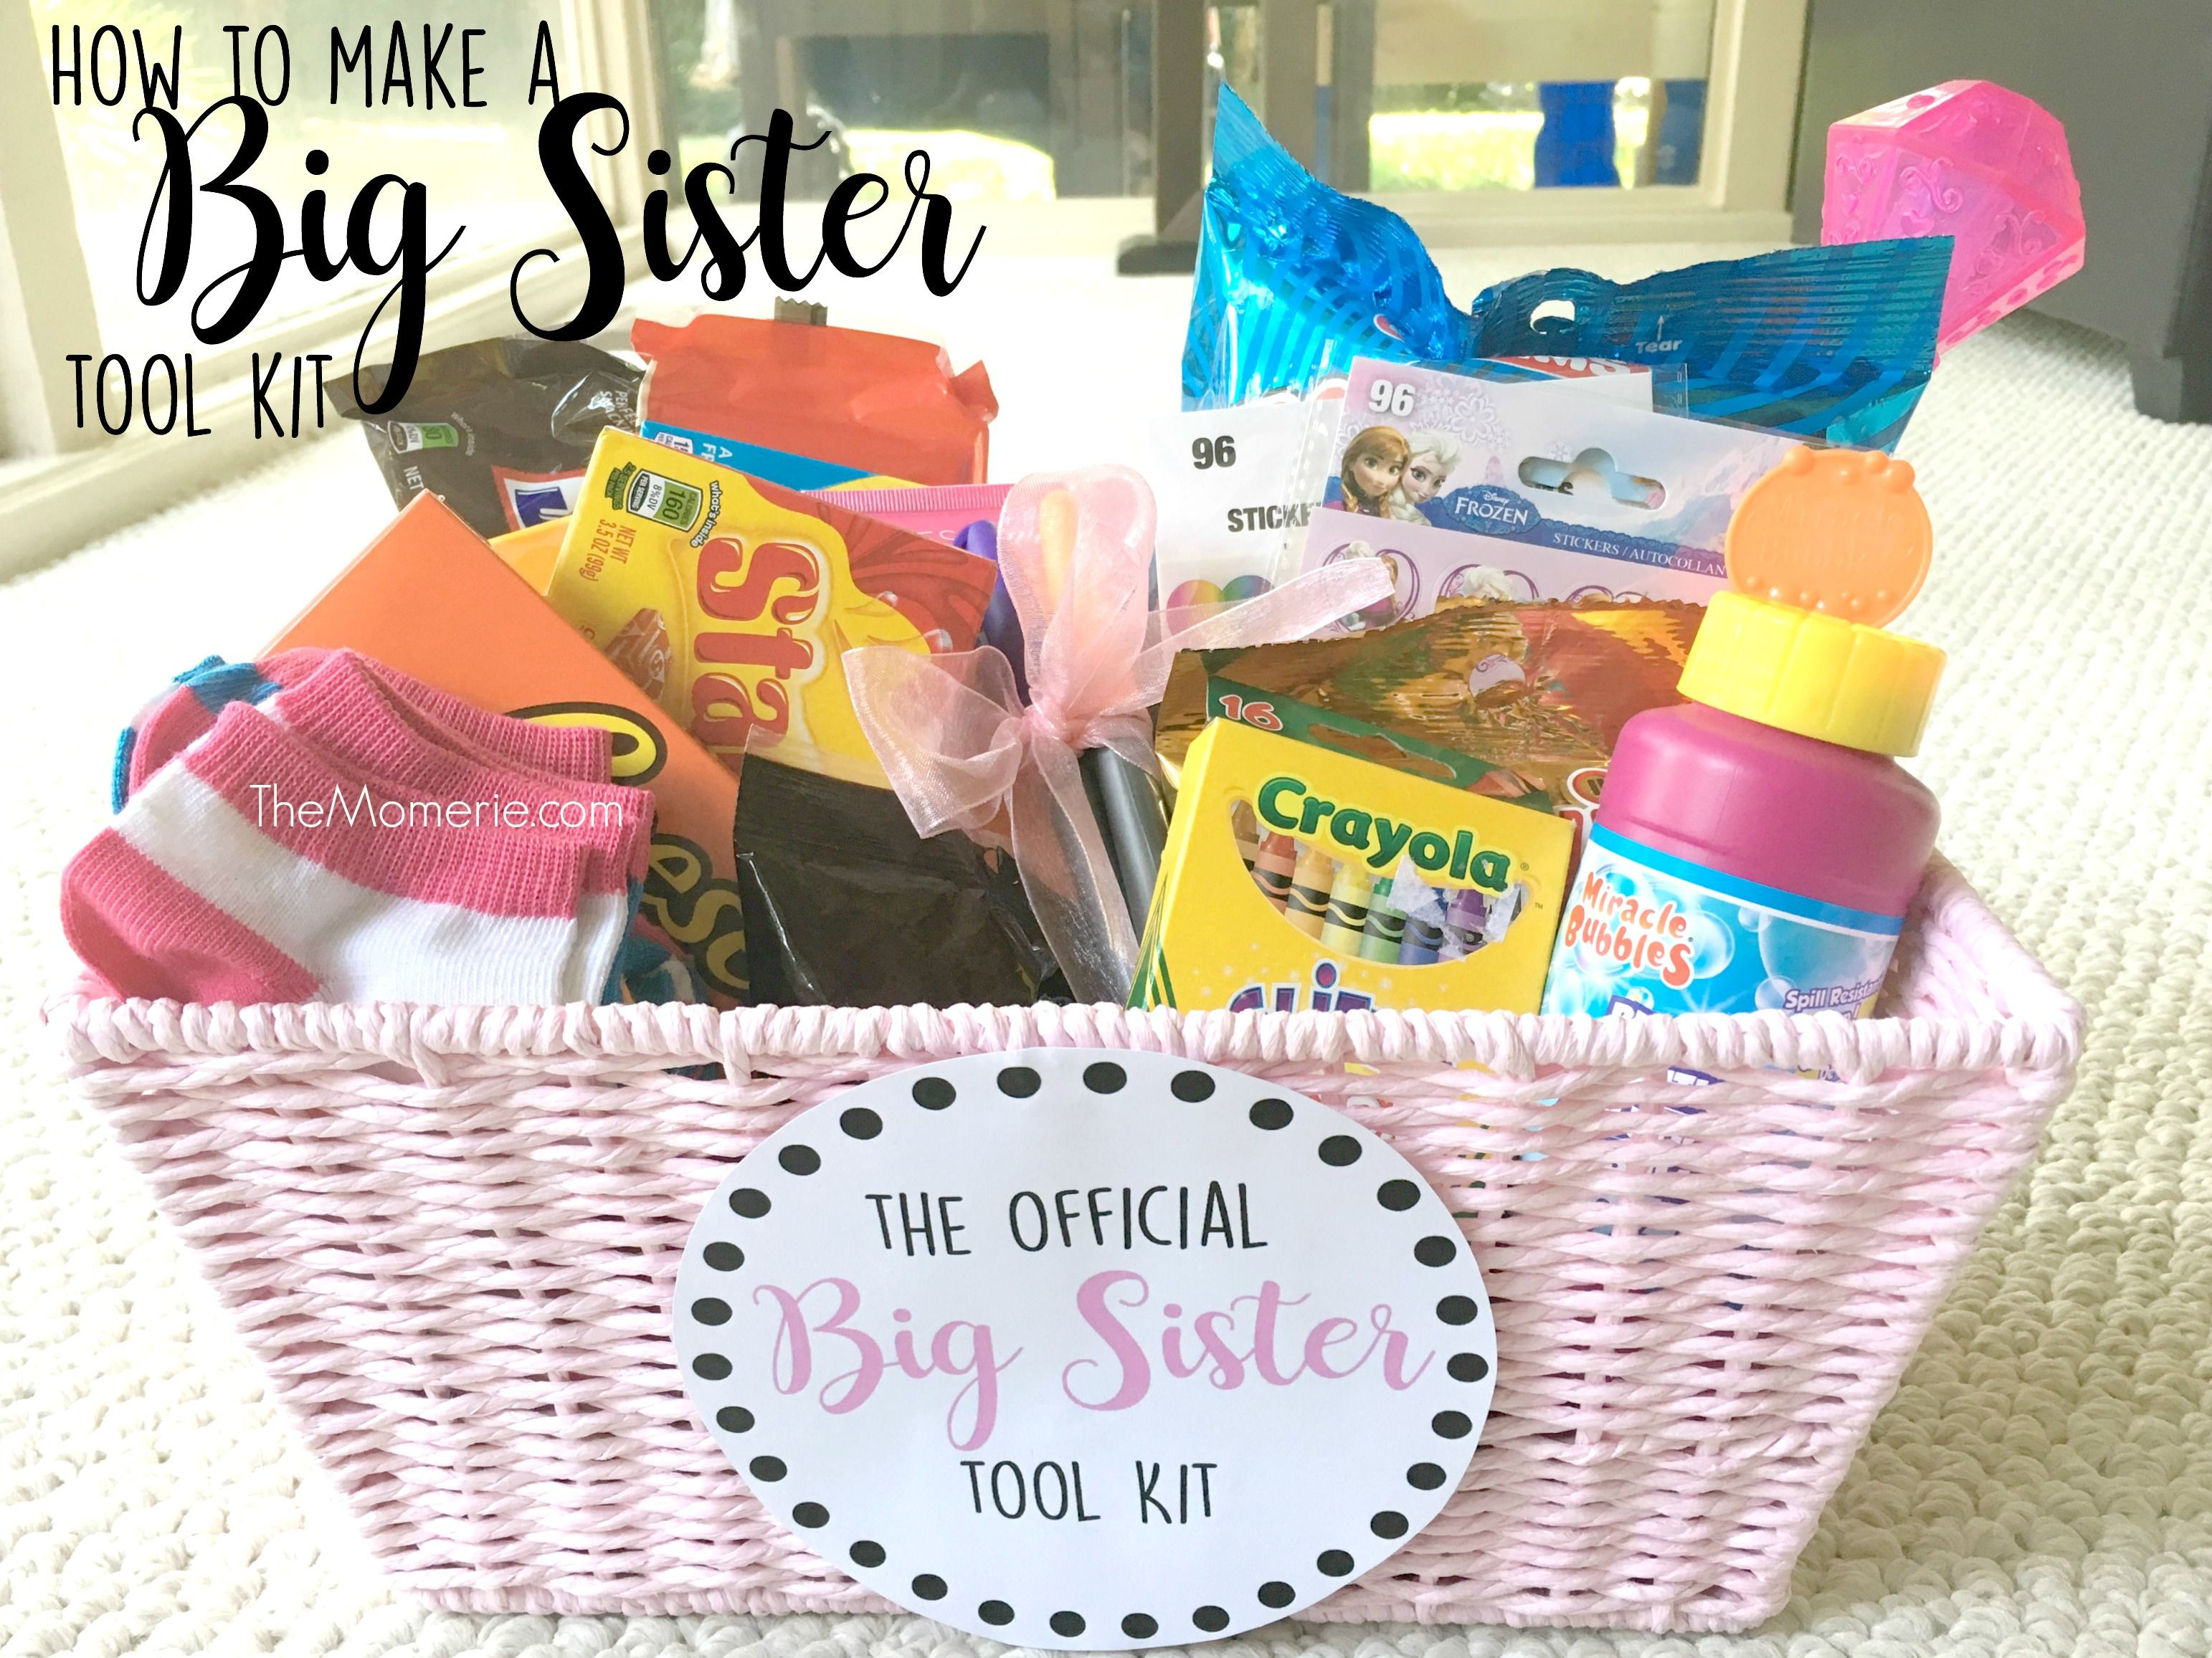 Gift Ideas For Big Sister From New Baby
 How To Make a Big Sister Tool Kit The Momerie …